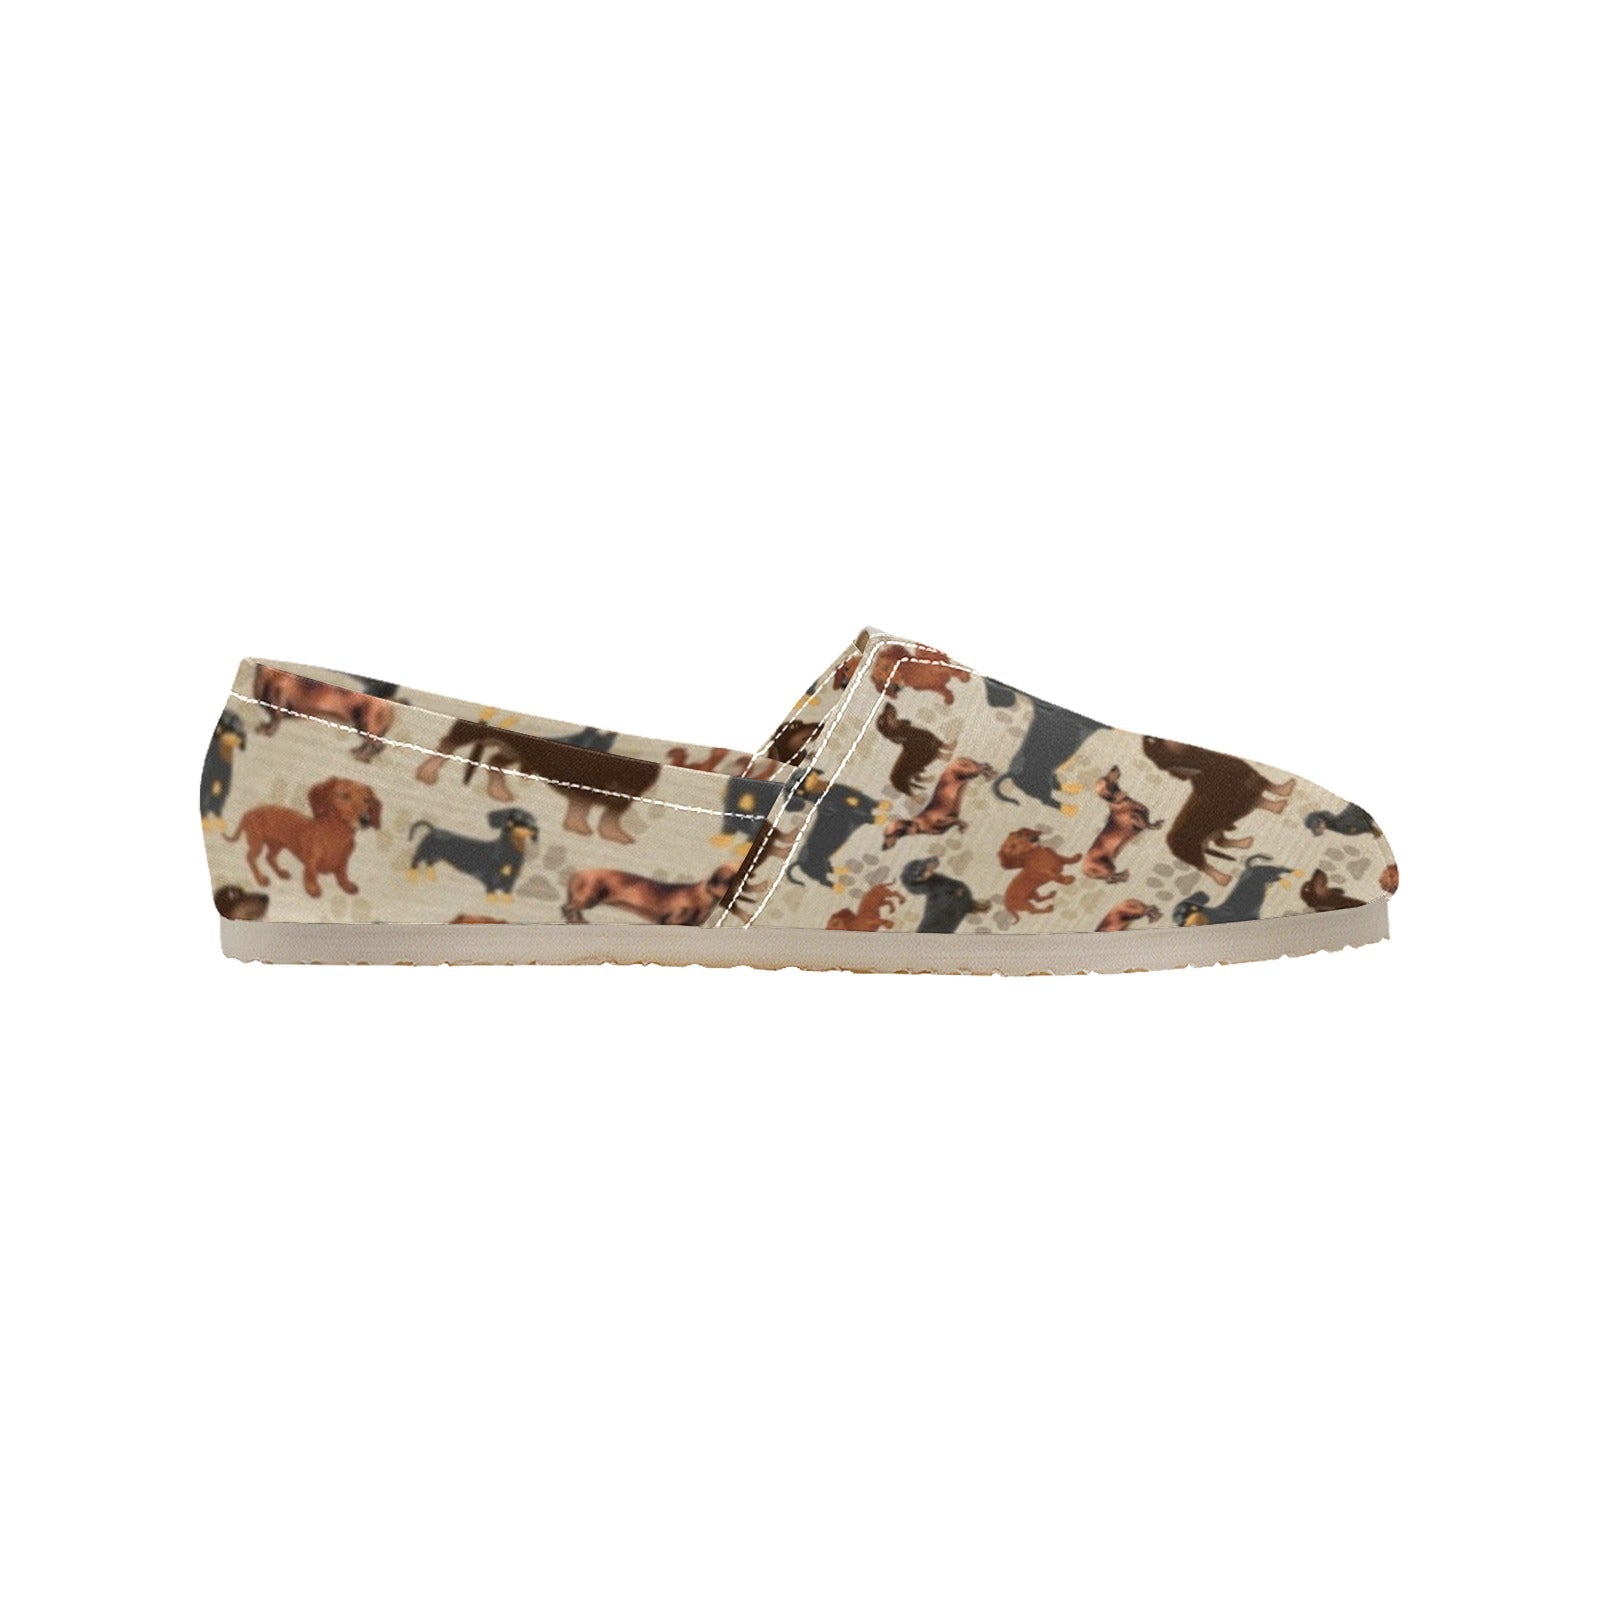 Dachshund - Casual Canvas Slip-on Shoes